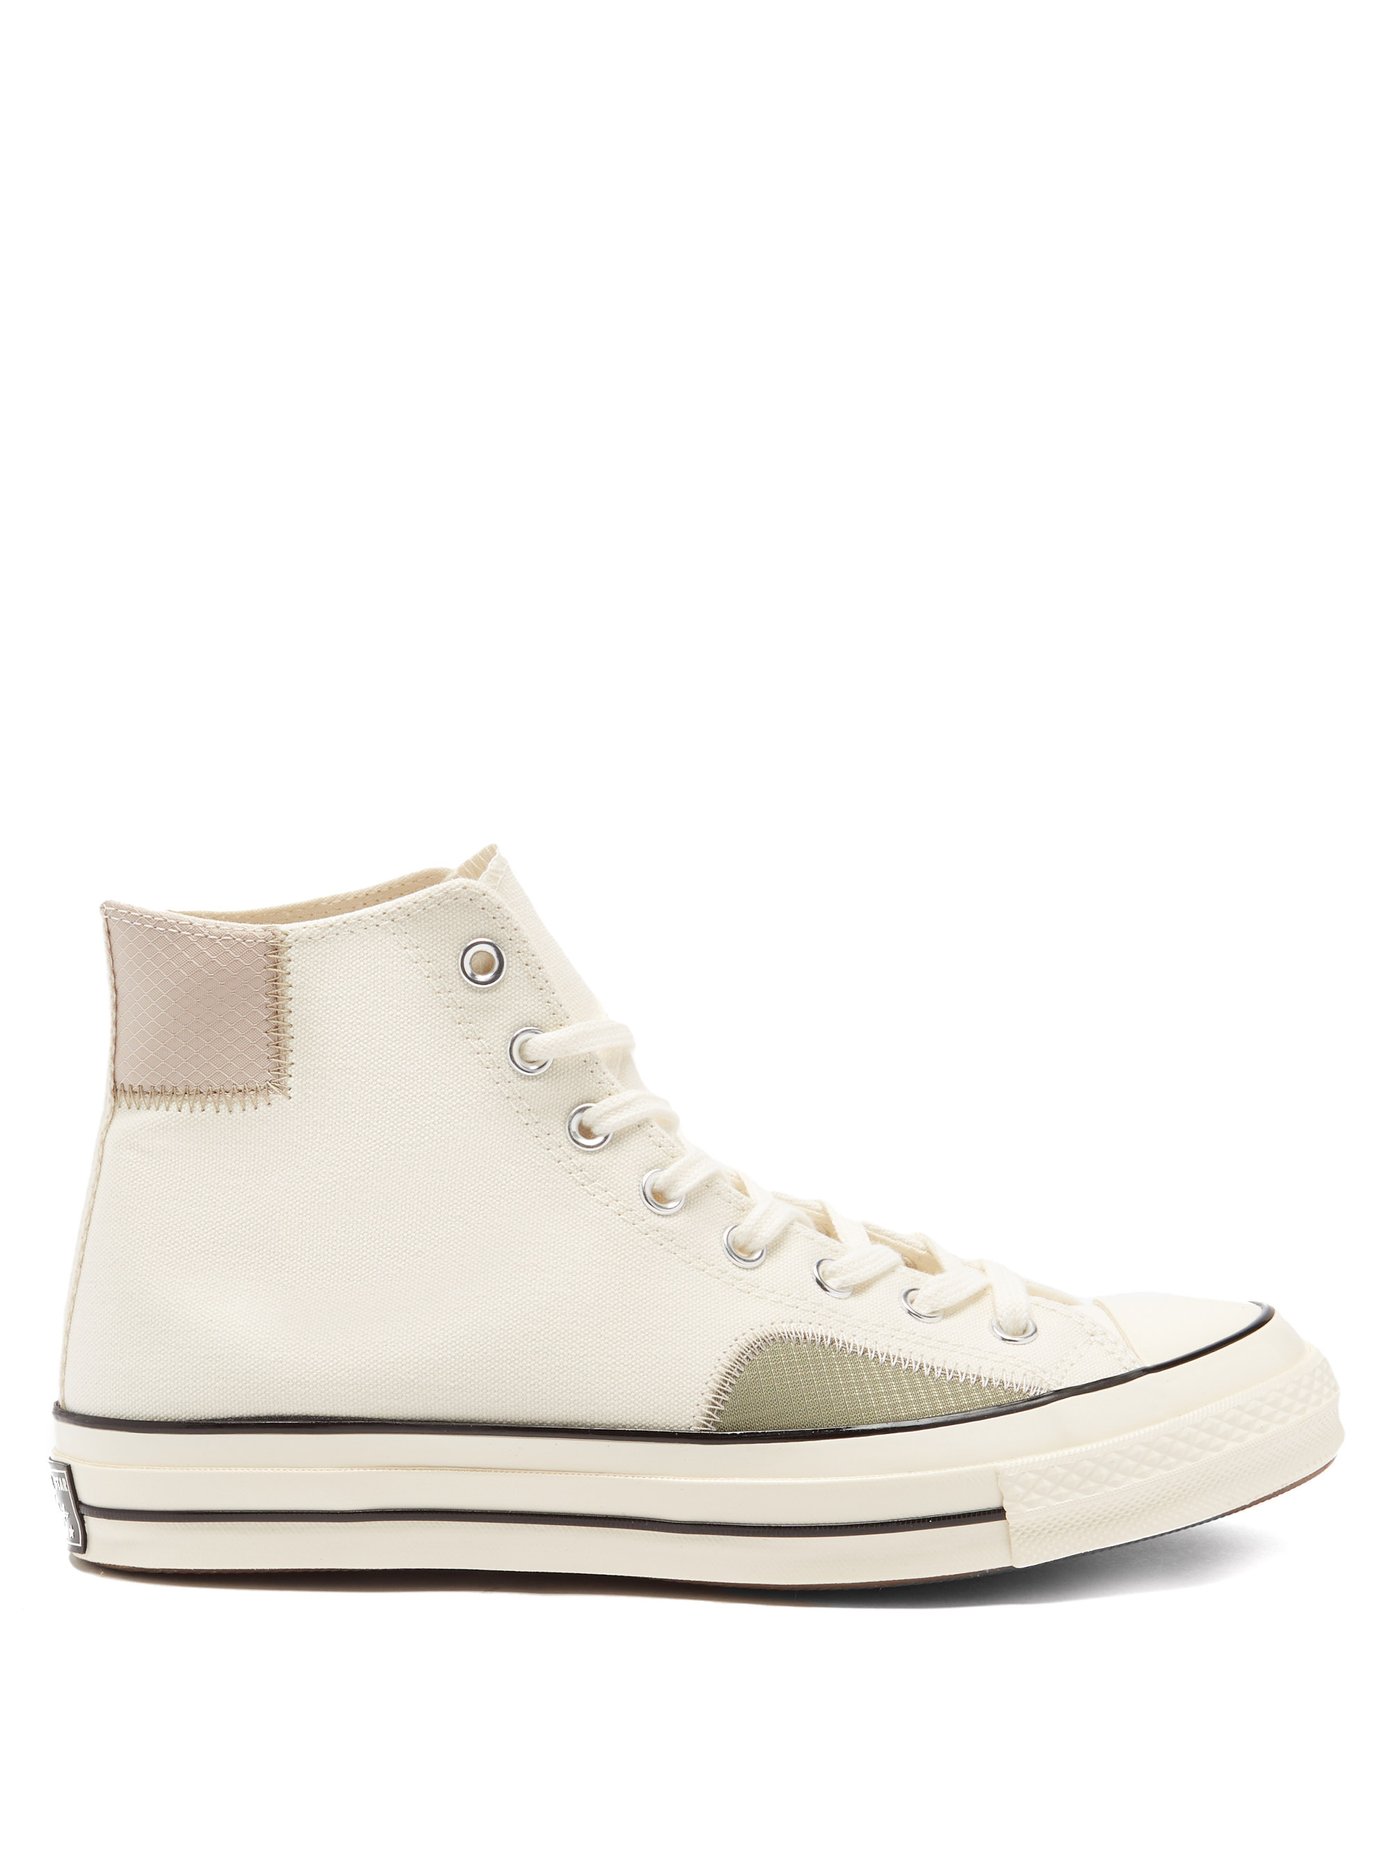 childrens leather converse high tops